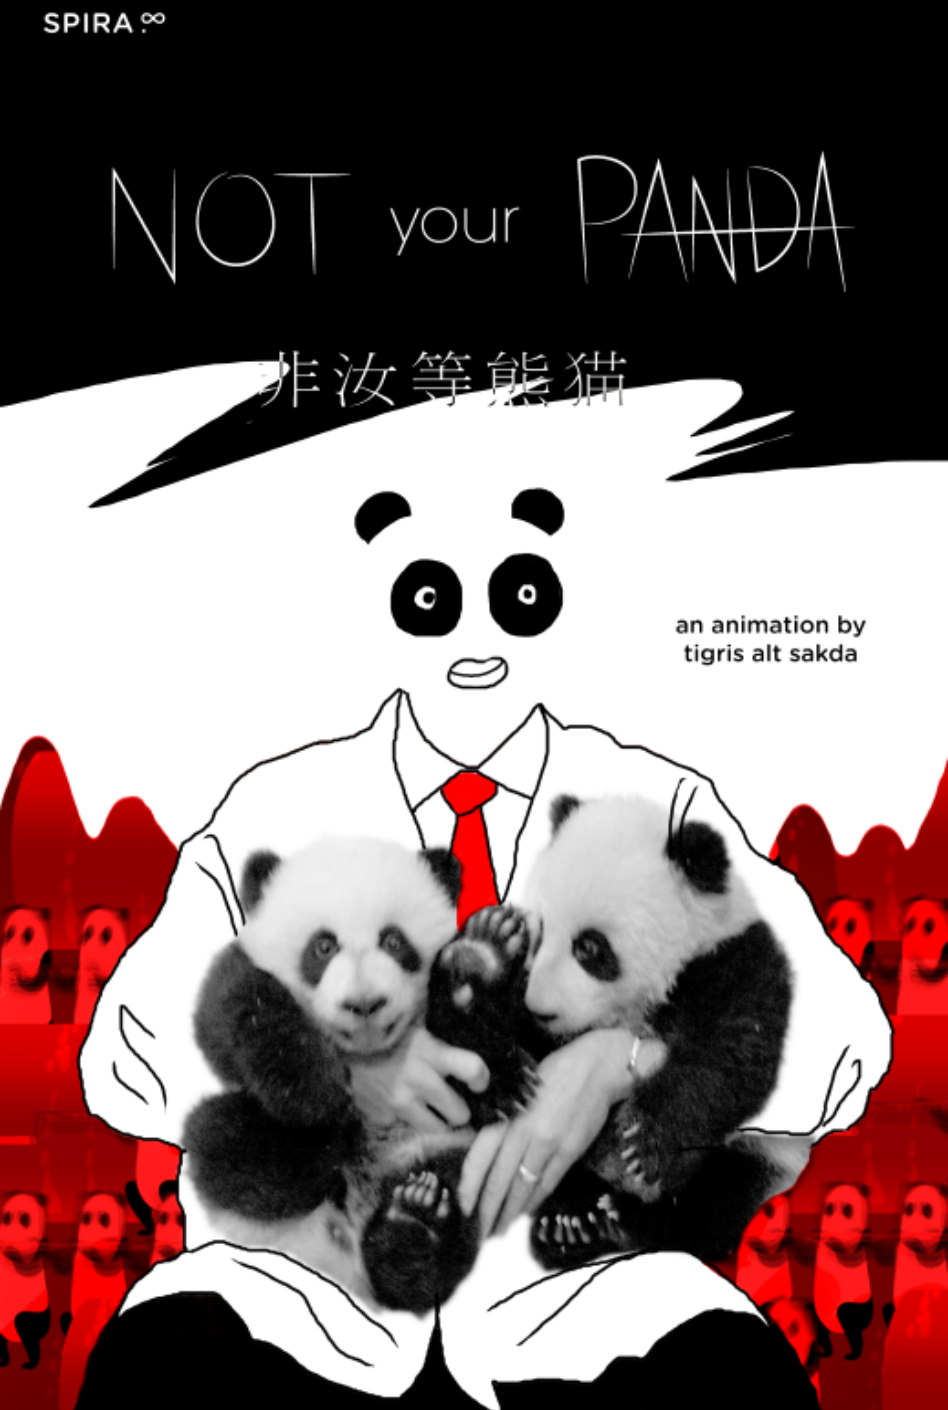 images/bottin_films/4dbdd3eb203138c1c94fbef4bfce5895-Not-your-panda-affiche.png#joomlaImage://local-images/bottin_films/4dbdd3eb203138c1c94fbef4bfce5895-Not-your-panda-affiche.png?width=948&height=1410